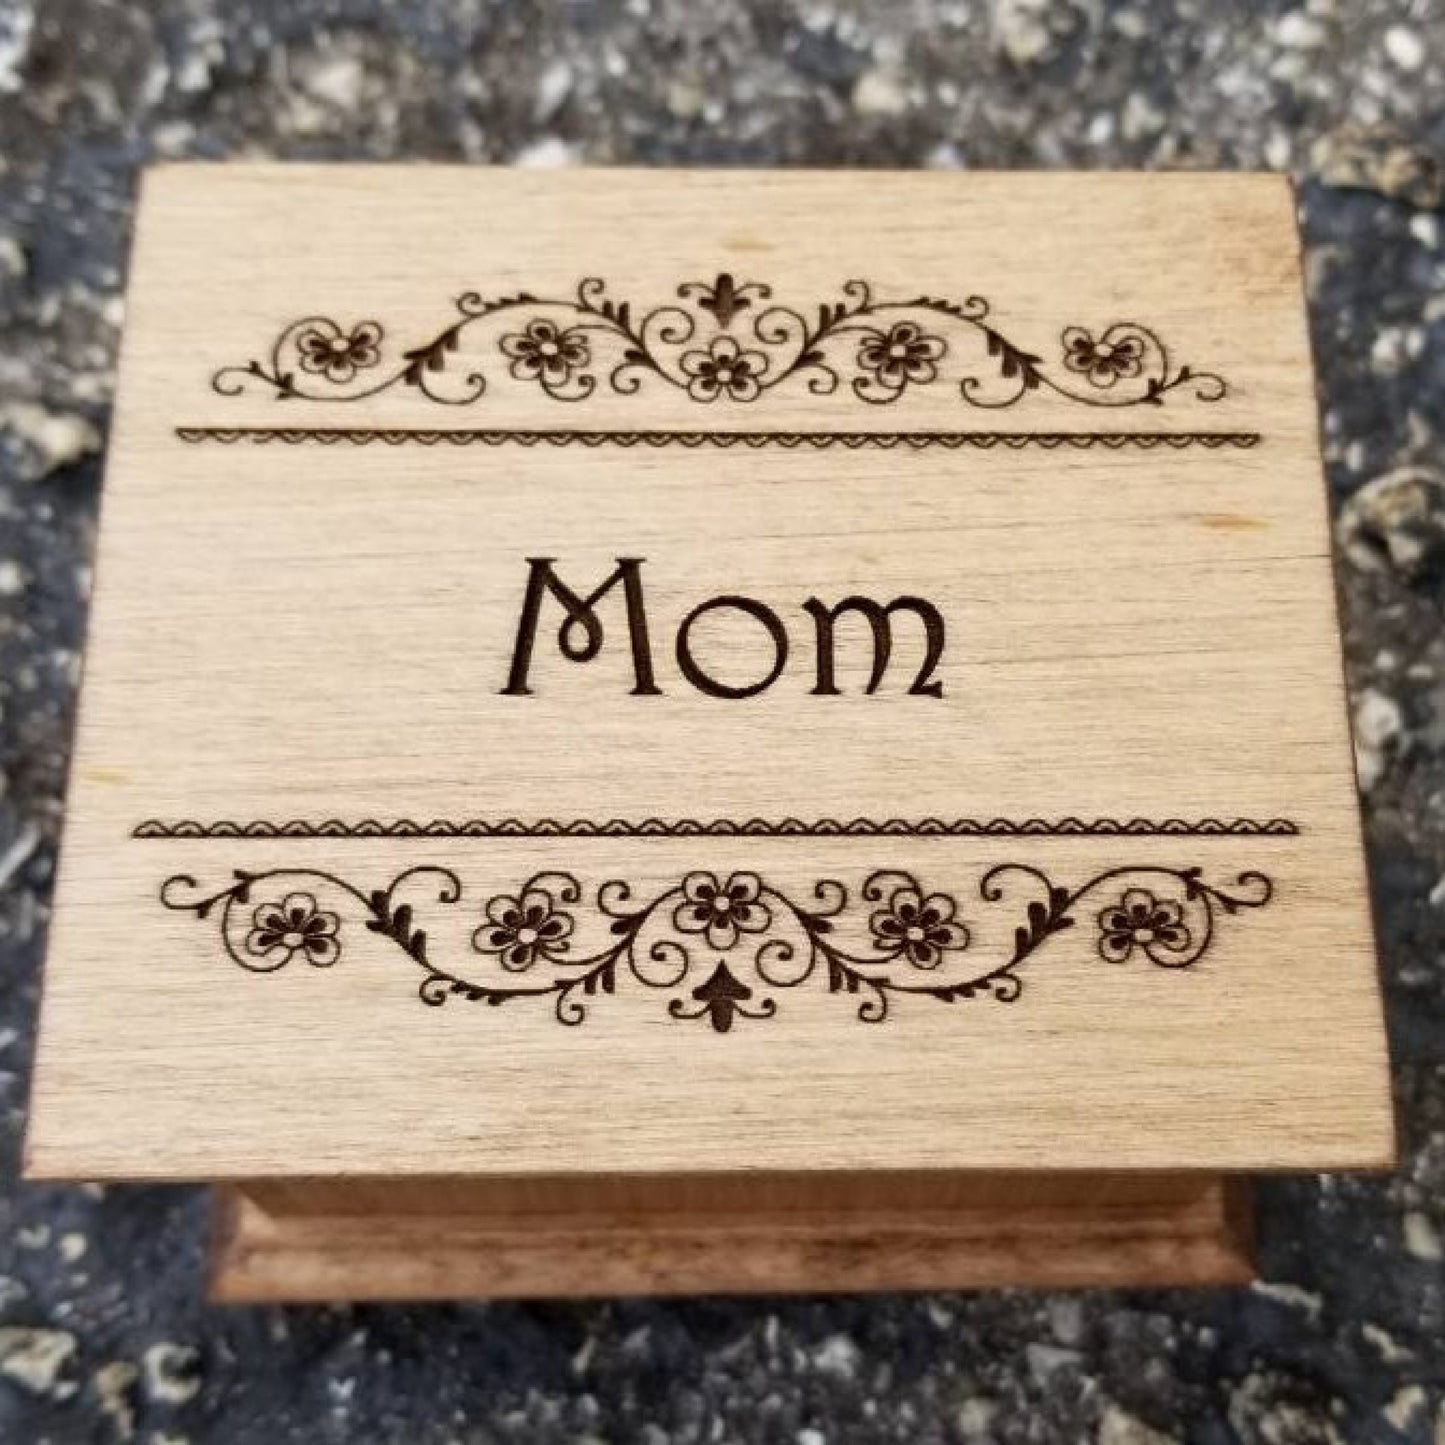 Mom music box, engraved music box for Mom, You are my sunshine, I will always love you, Wind beneath my wings, 